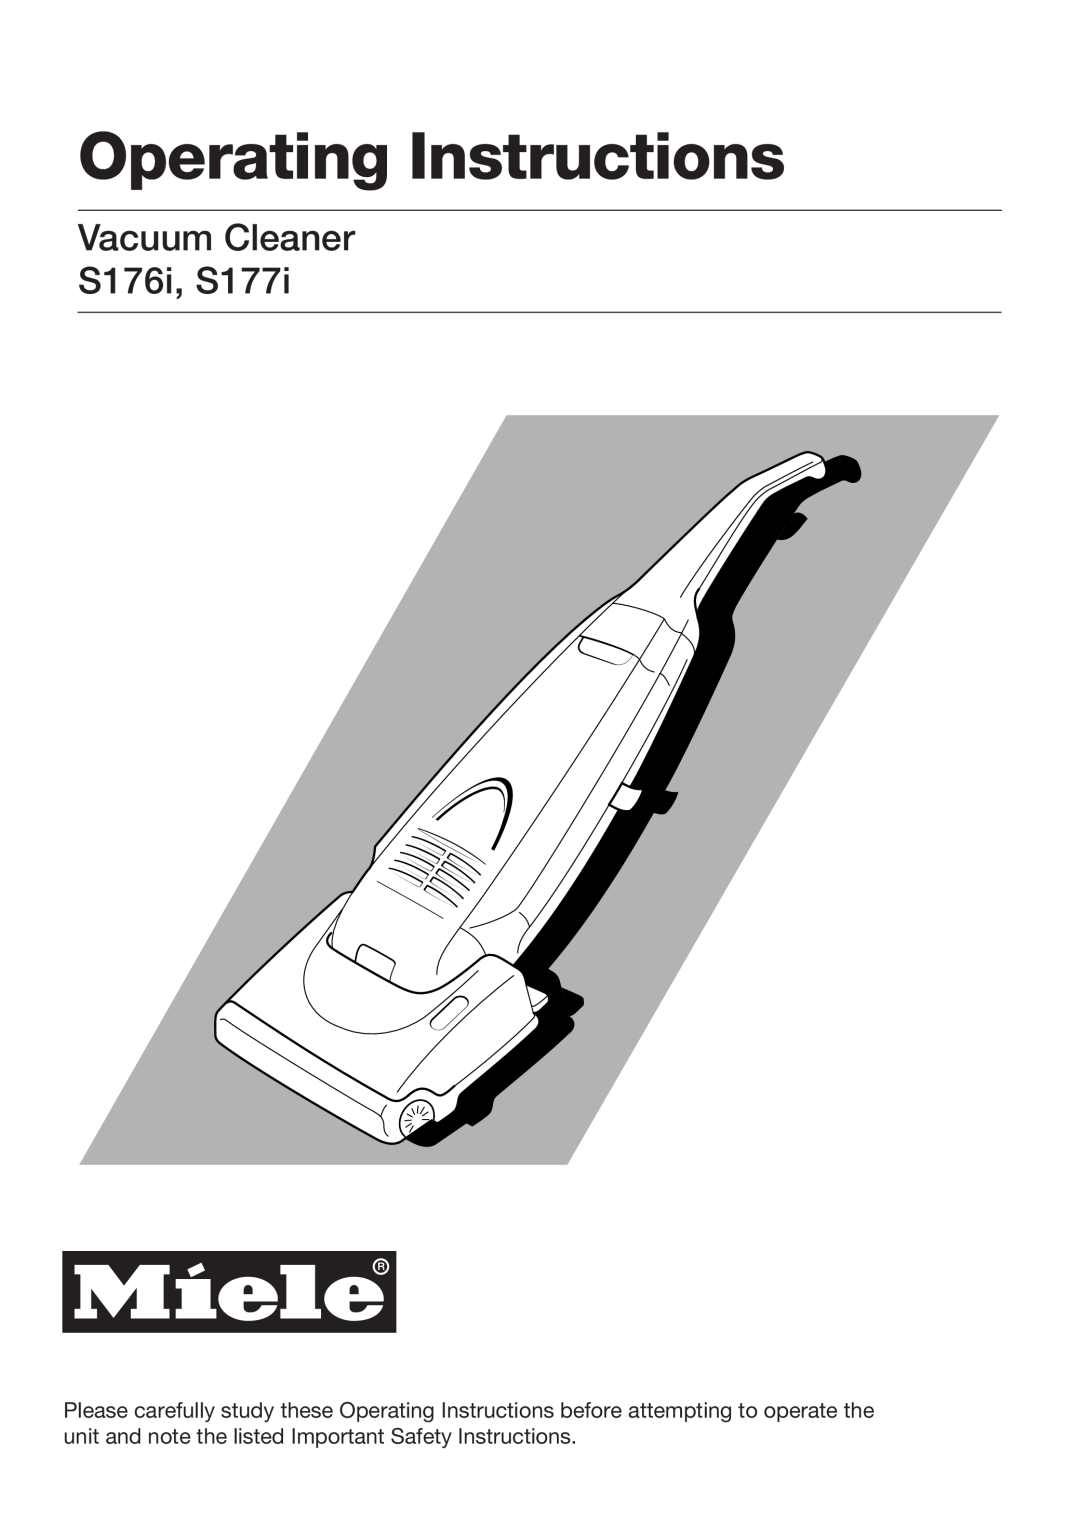 Miele important safety instructions Operating Instructions, Vacuum Cleaner S176i, S177i 